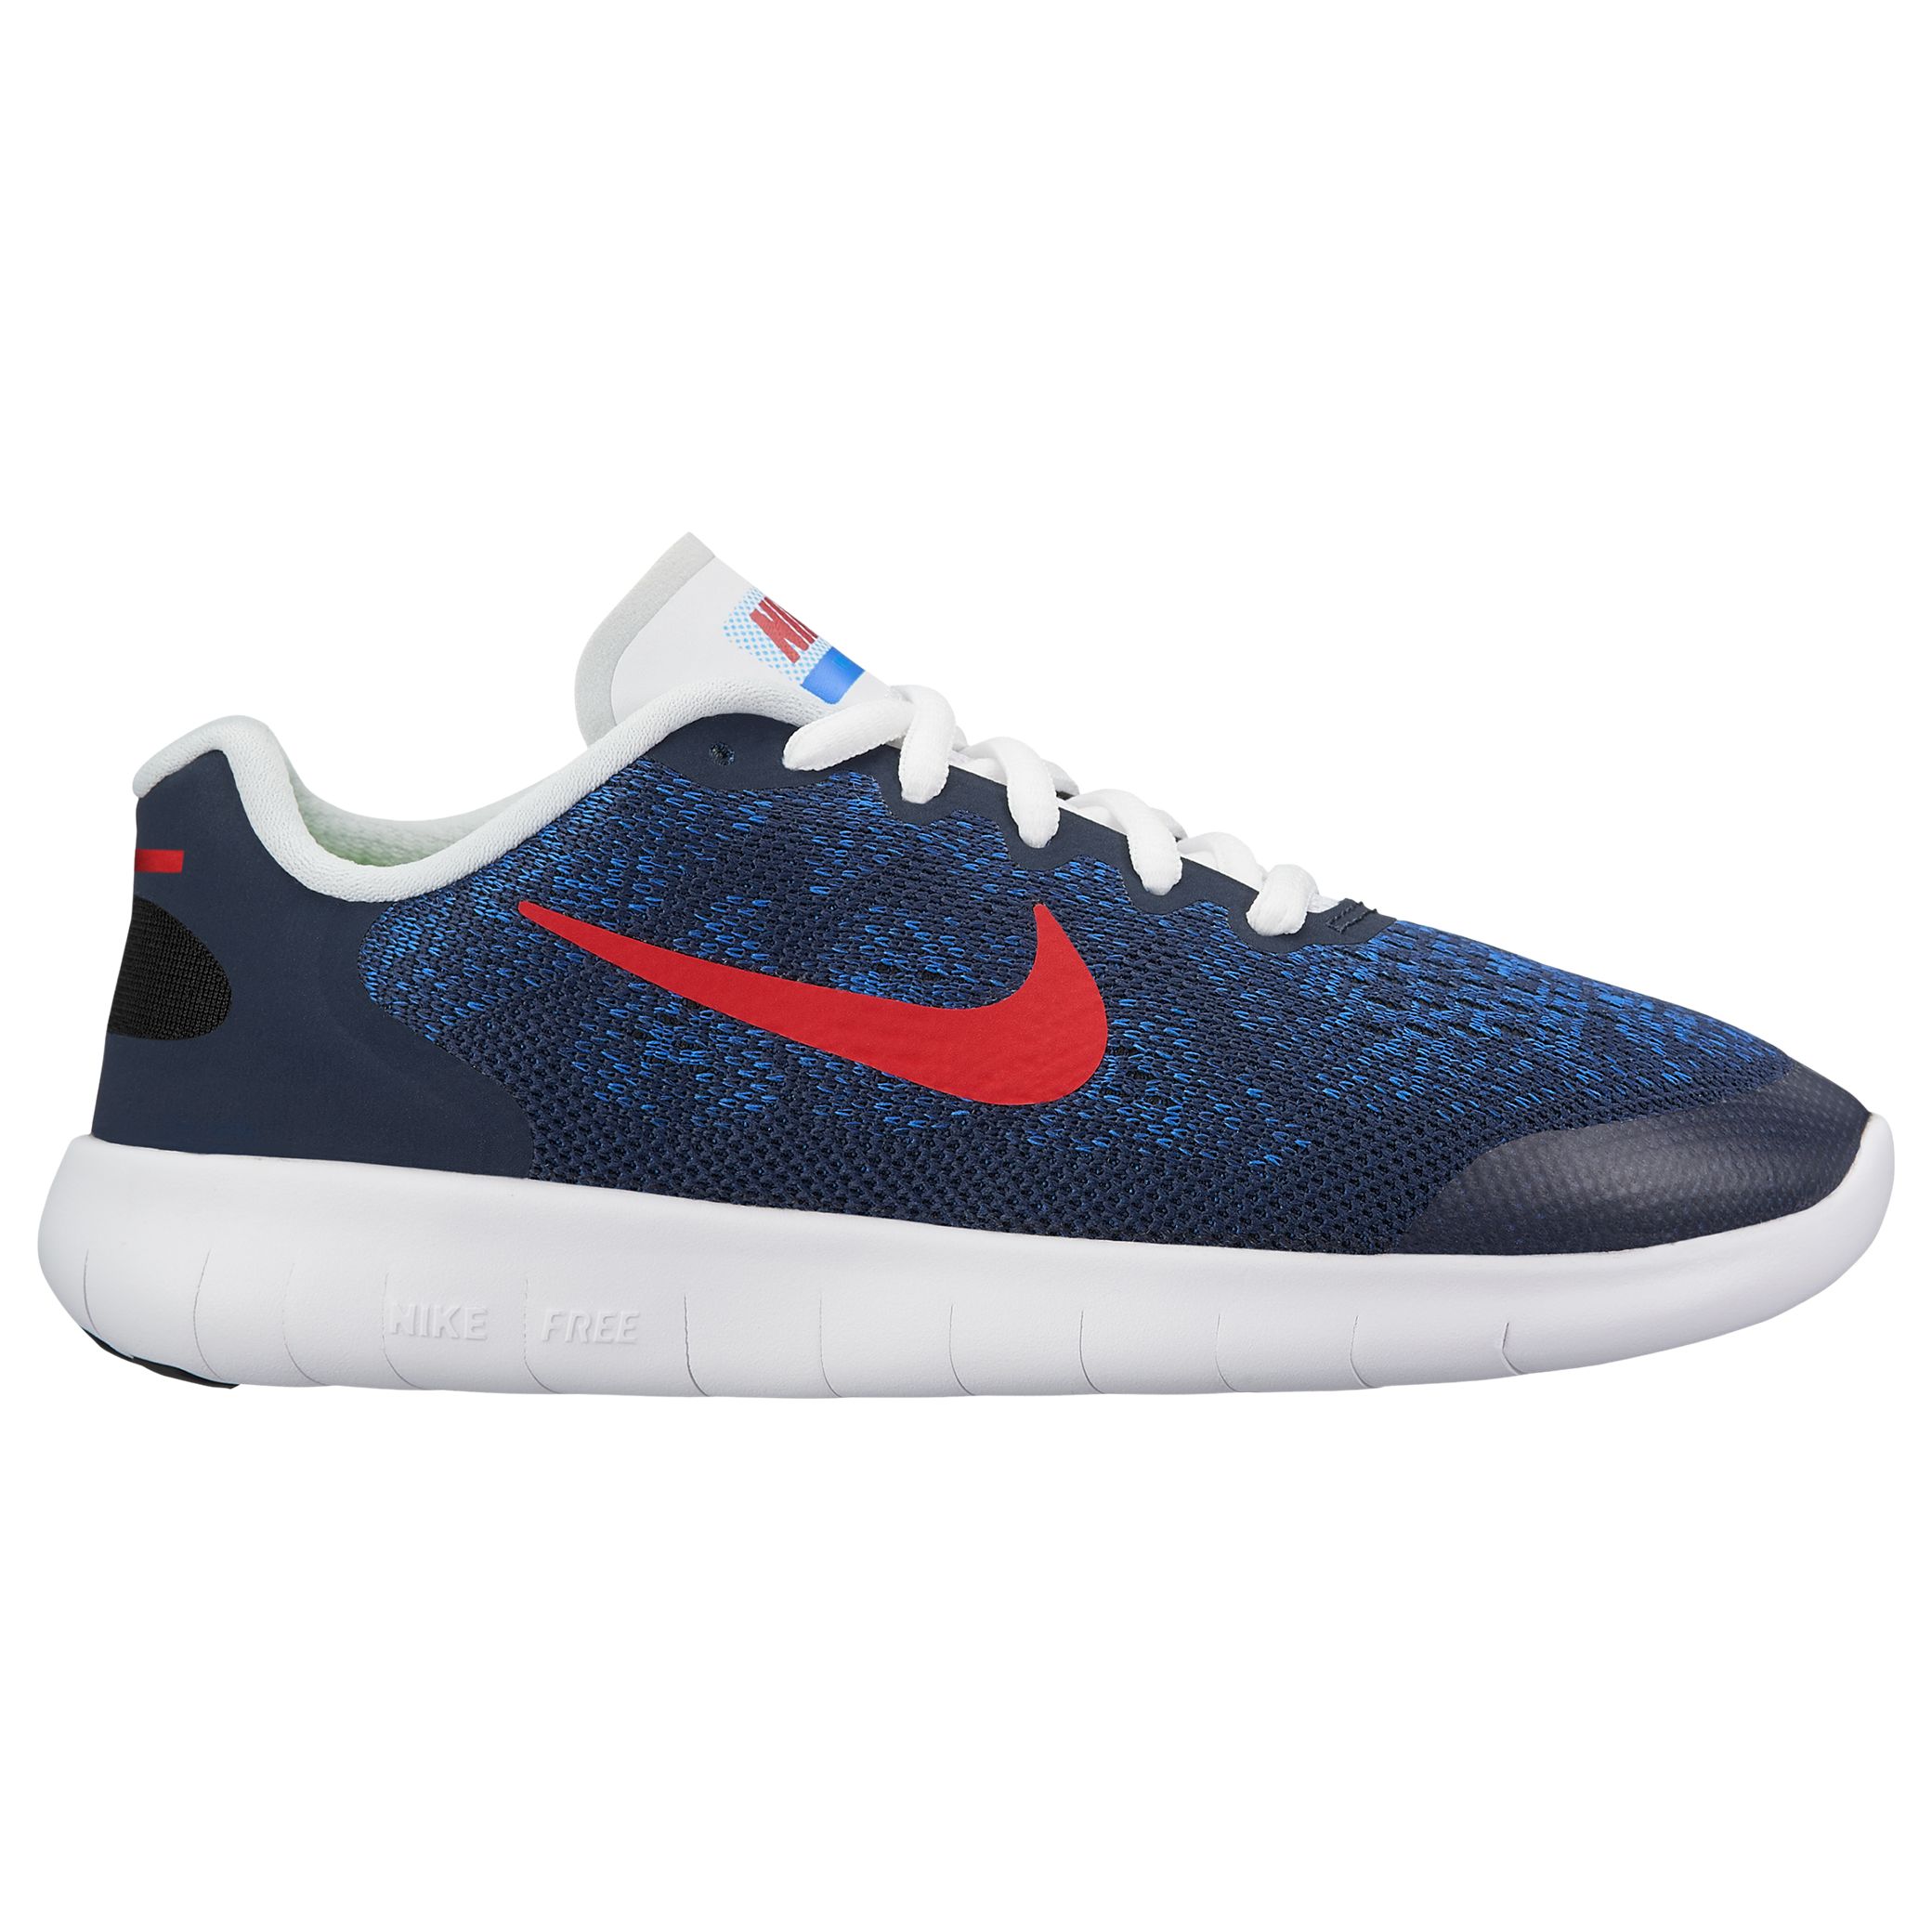 Nike Children's Free RN 2017 (GS) Trainers, Navy/Red, 3